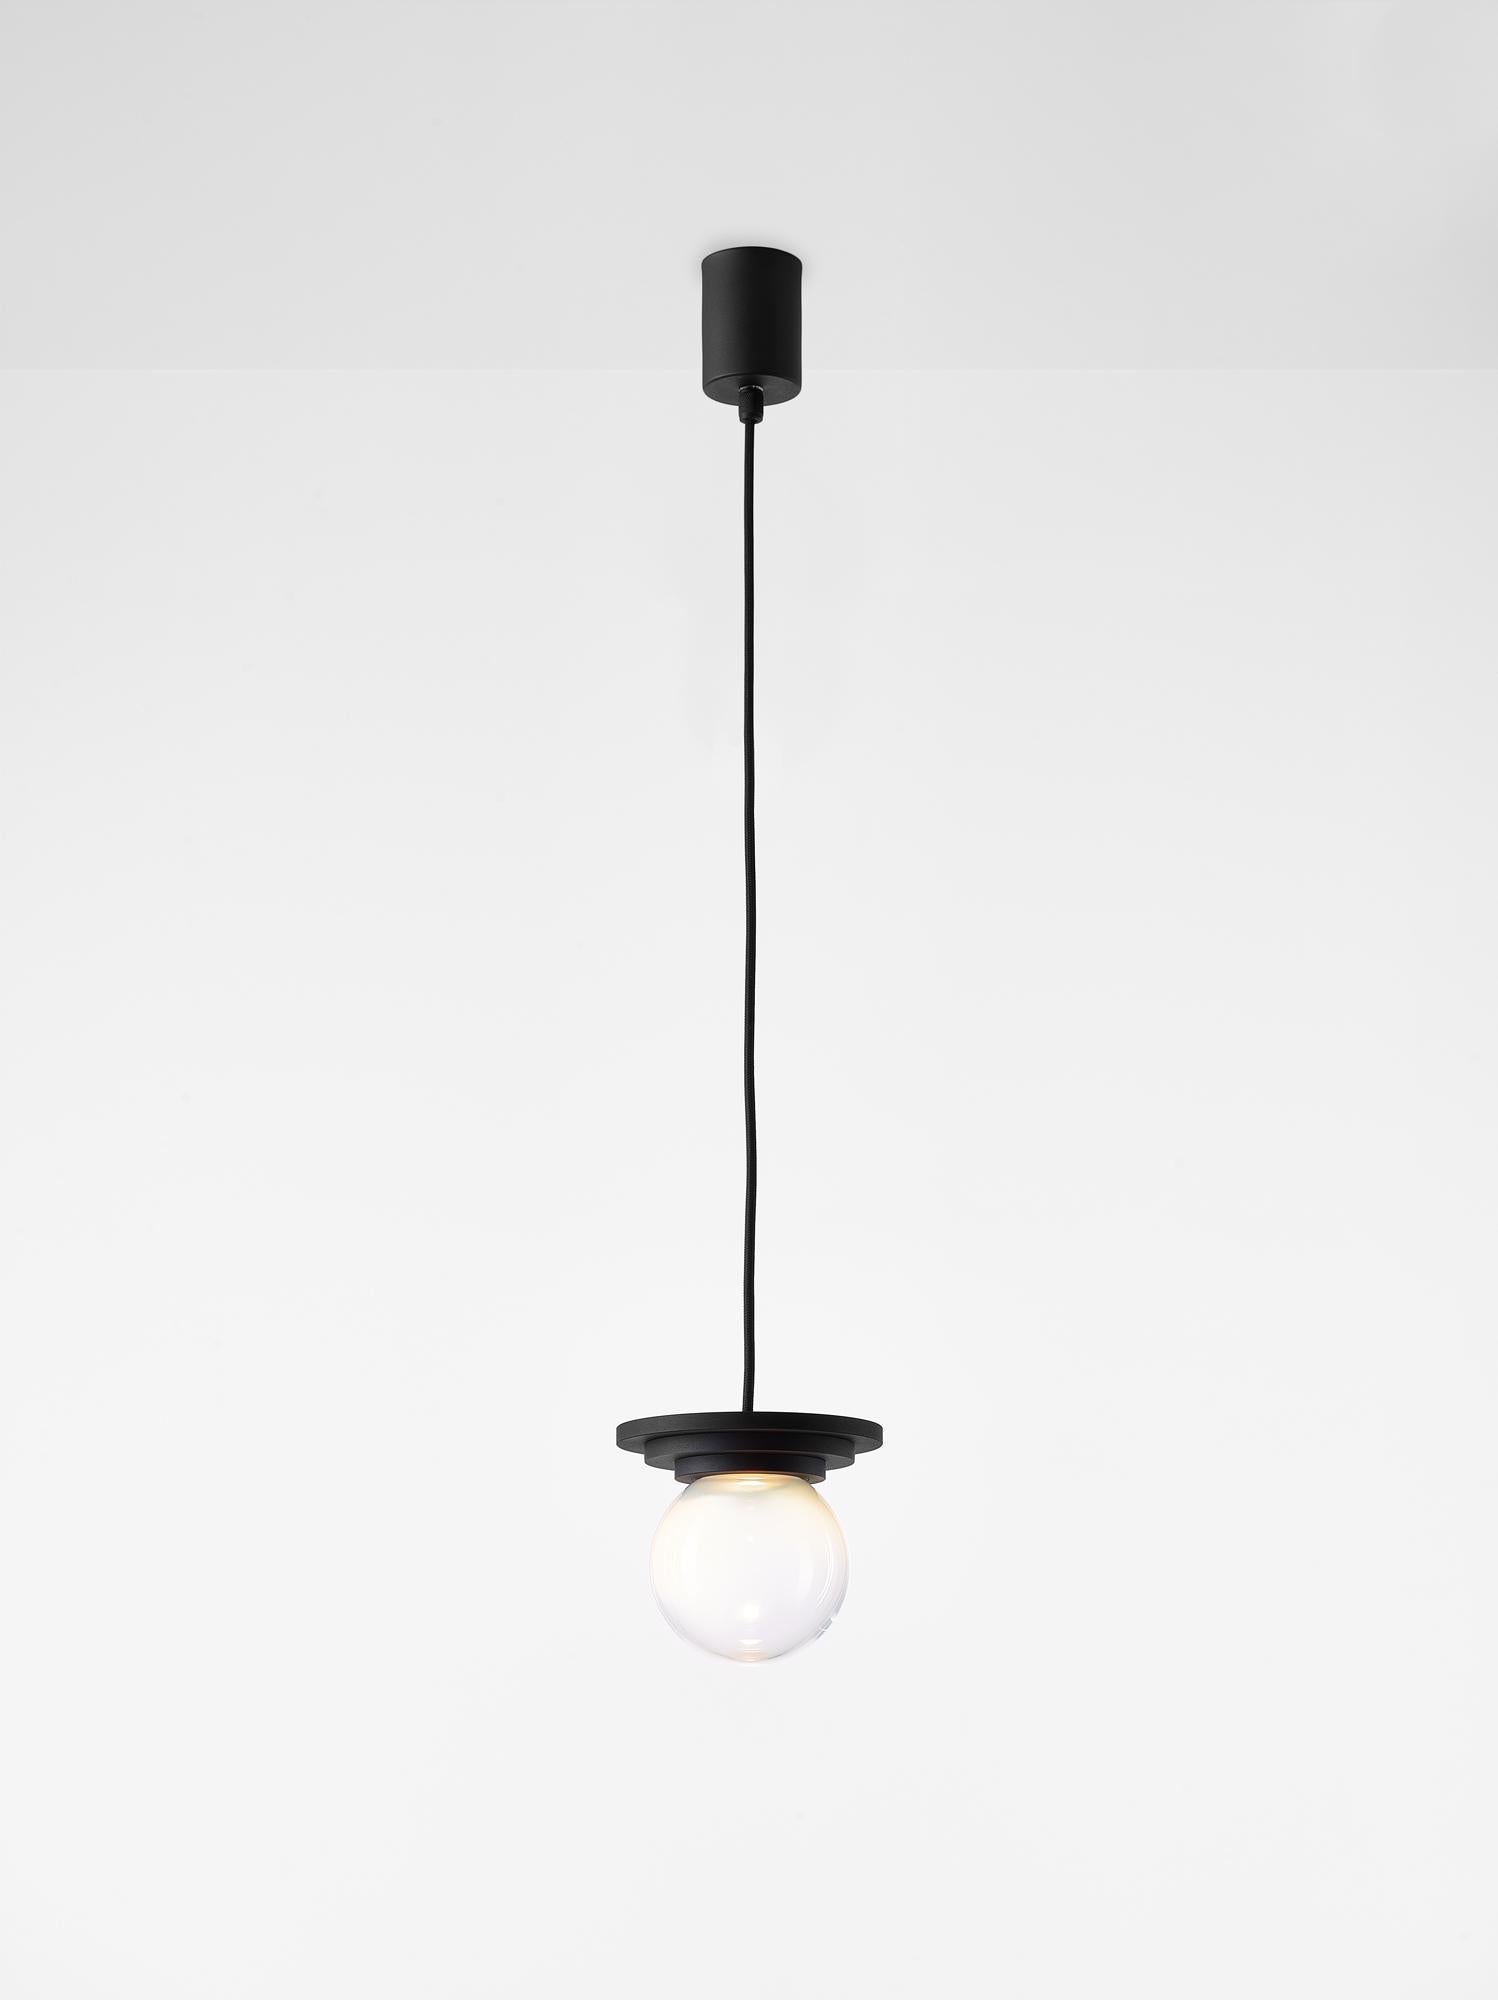 Set of 2 Black and Clear Stratos Mini Ball Pendant Light by Dechem Studio
Dimensions: D 12 x H 14 cm
Materials: Aluminum, Glass.
Also Available: Different colours available,

Different shapes of capsules and spheres contrast with anodized alloy